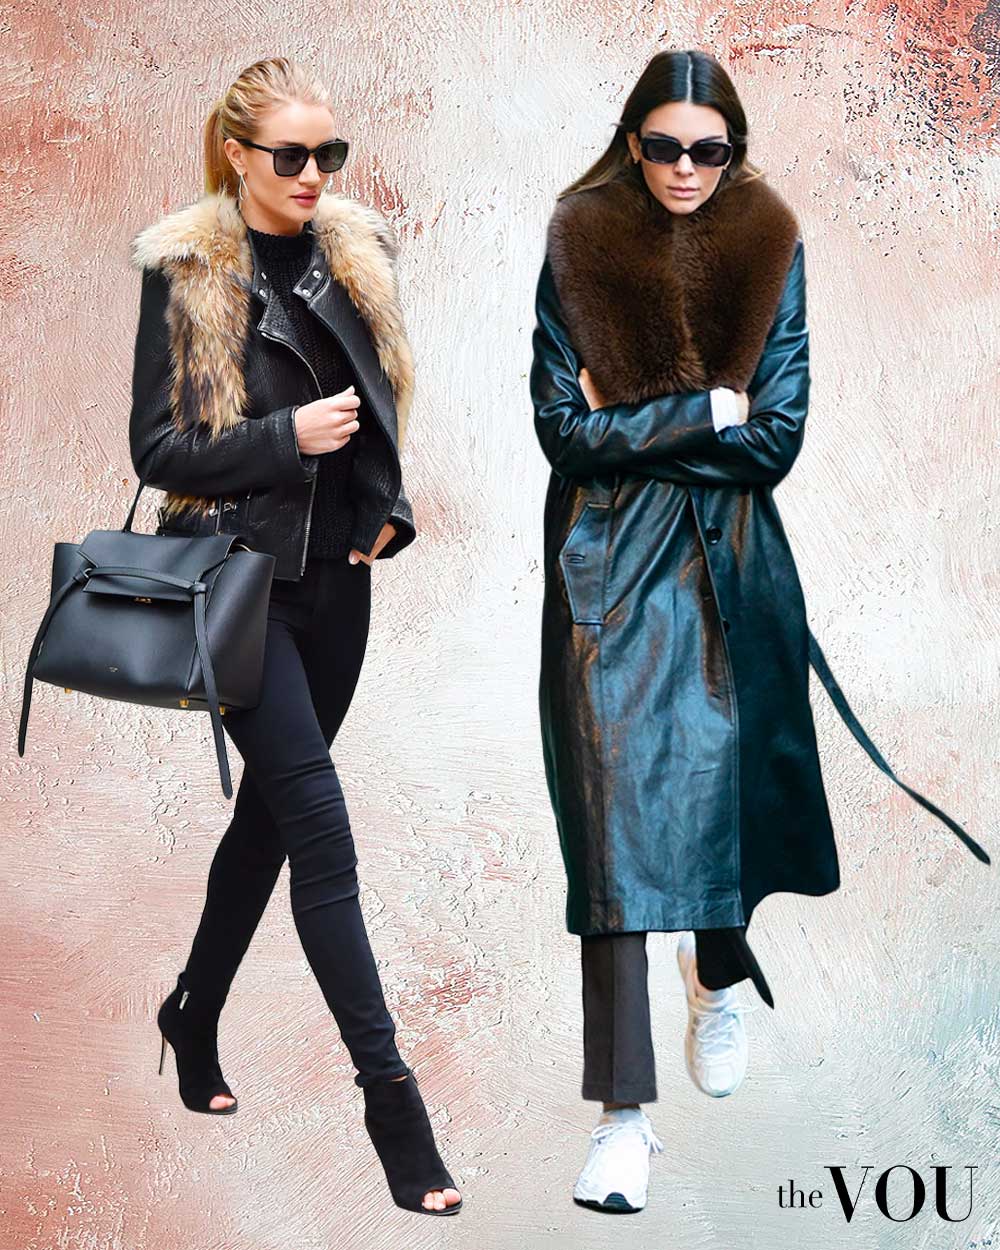 Fur Leather Jackets For Women